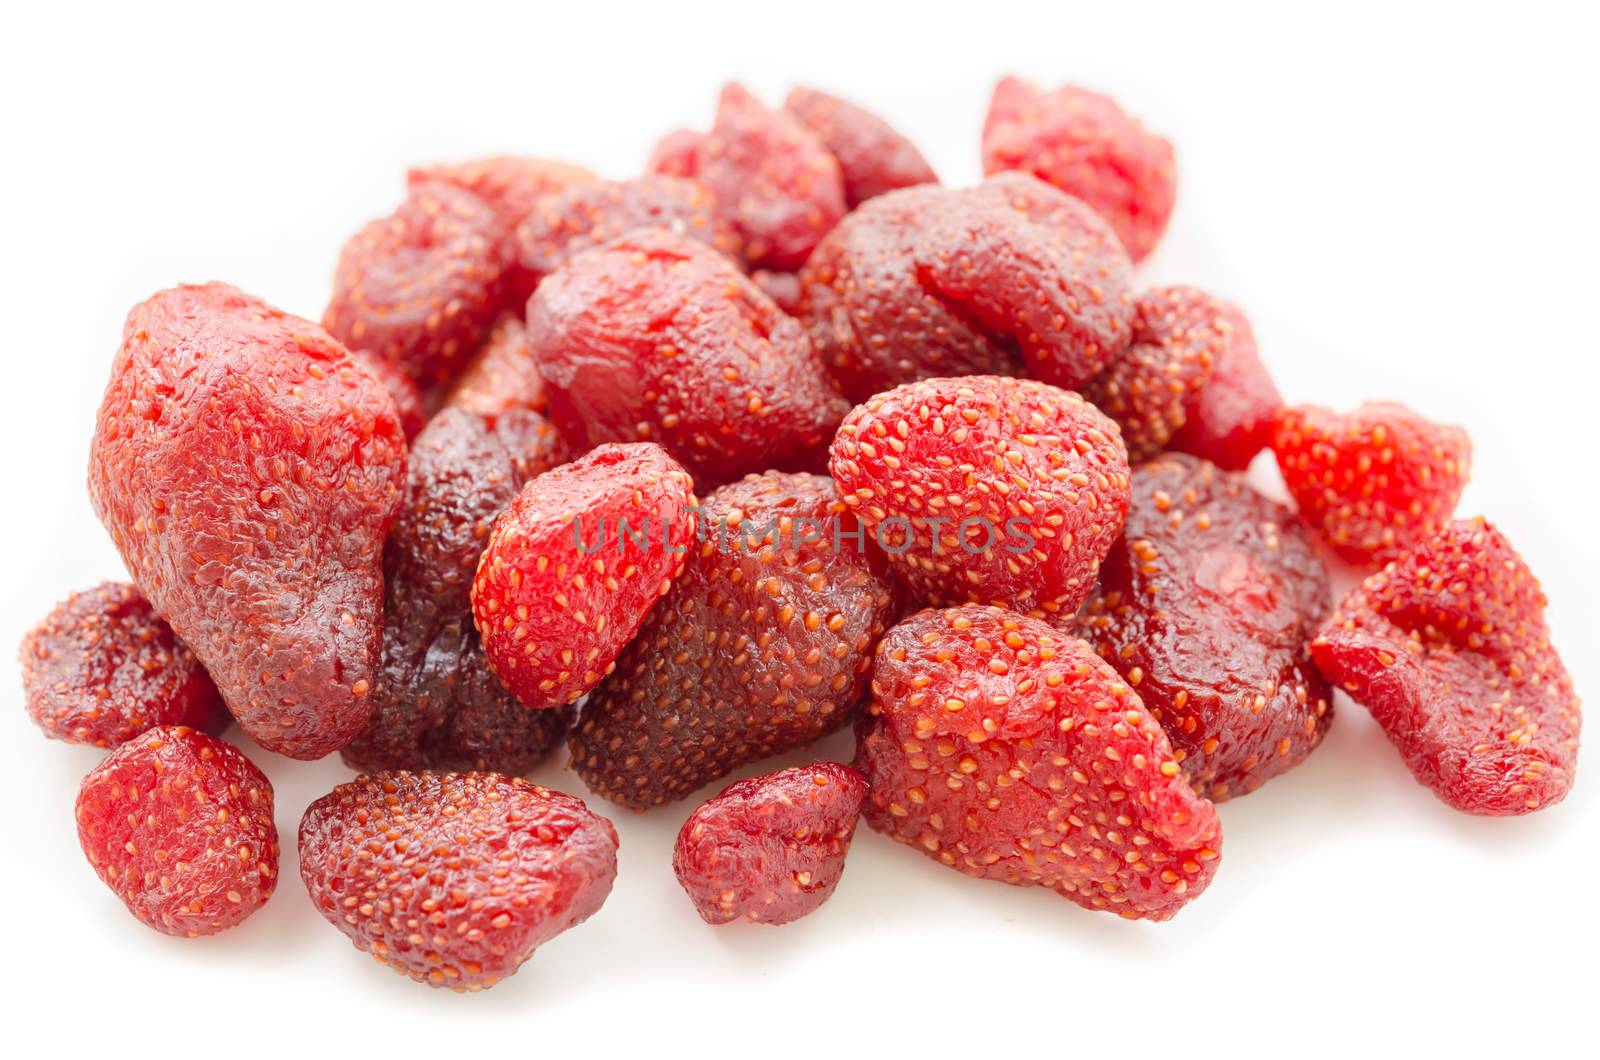 Pile of tasty red dried dehydrated strawberries by Gamjai